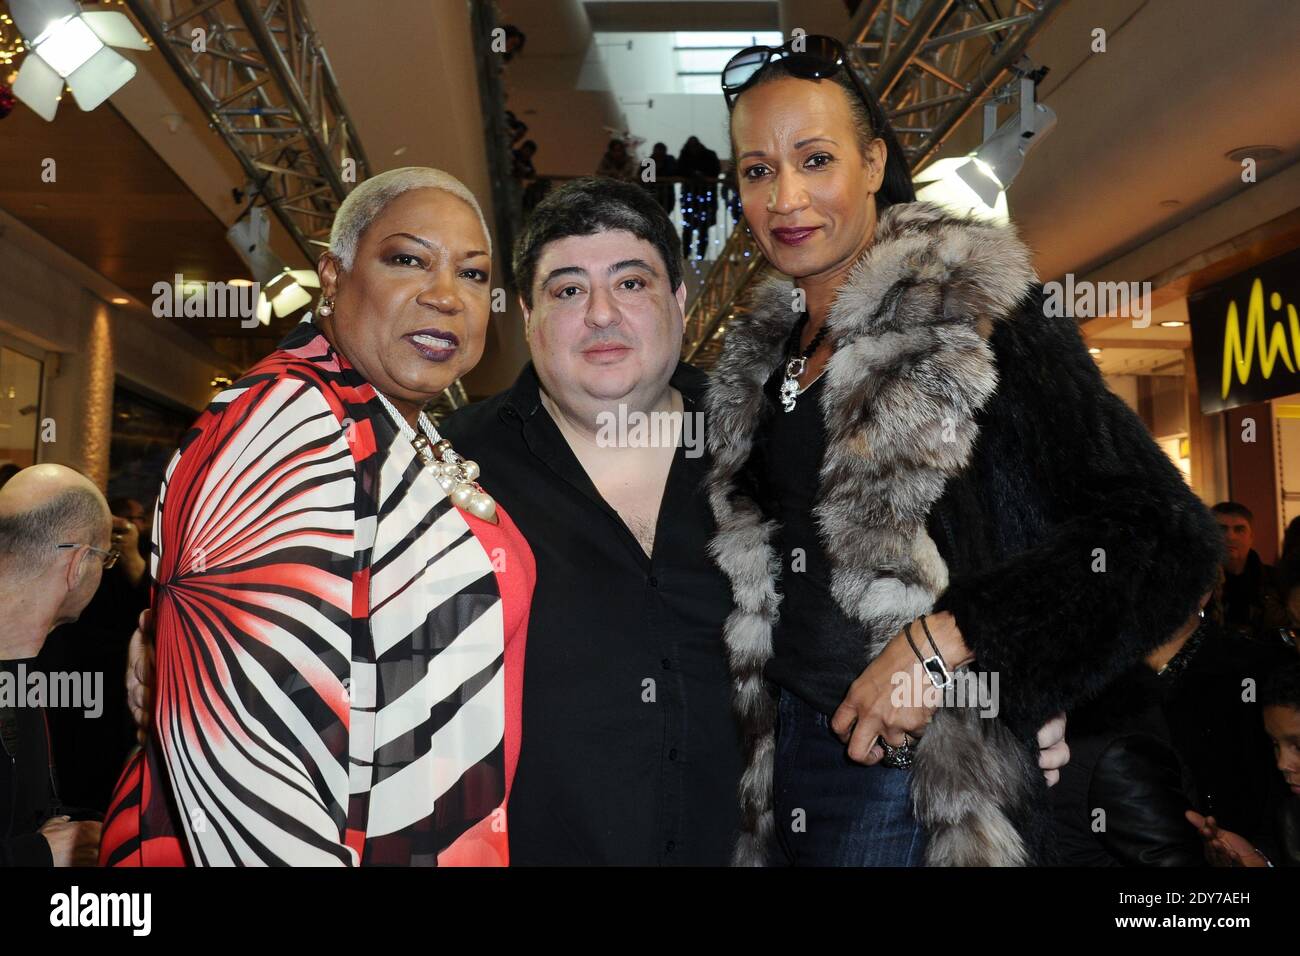 Firmine Richard, Edmond Boublil and Vincent McDoom attending the runway  show for Firmine Richard's '46 et Plus' new Ready-to-wear collection (the  brand is exclusively aiming for big size customers) at La Vache